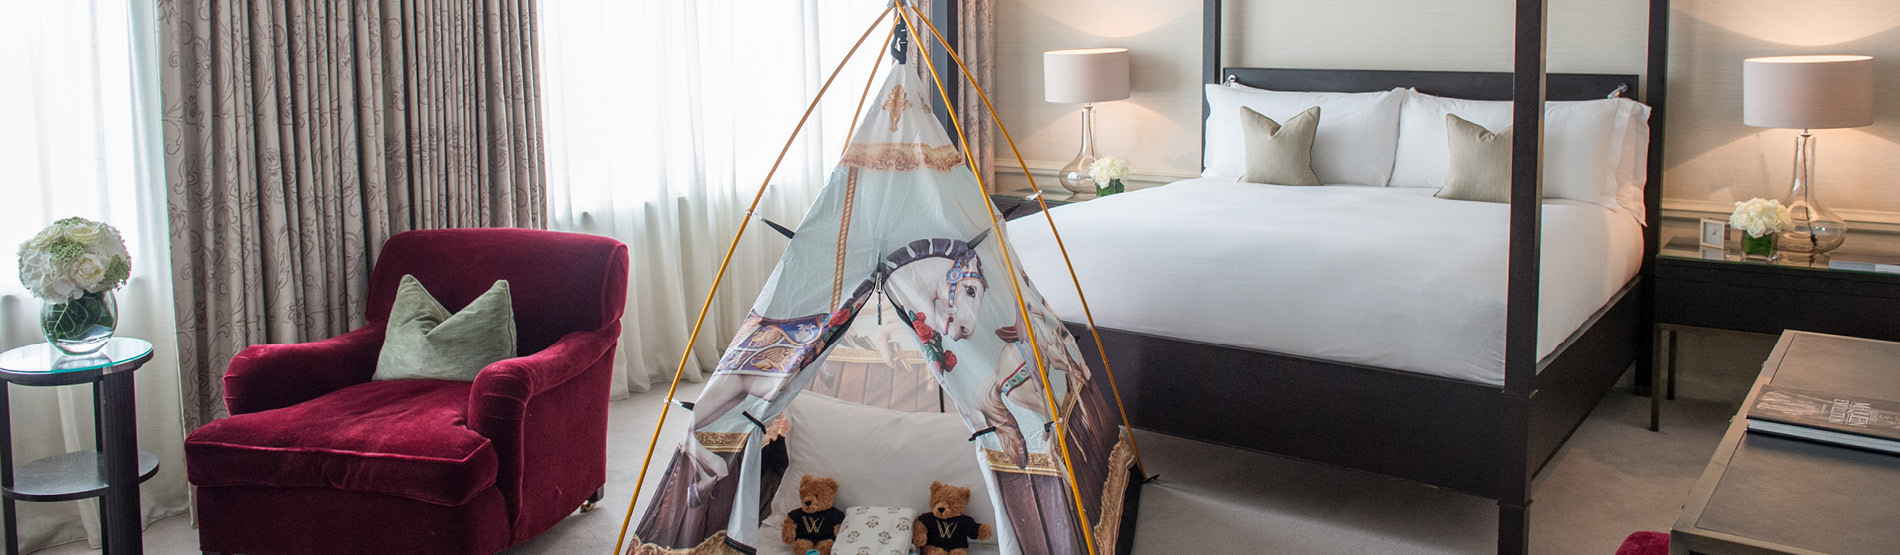 tepee in a room with a Four Poster bed at The Westbury hotel in Dublin